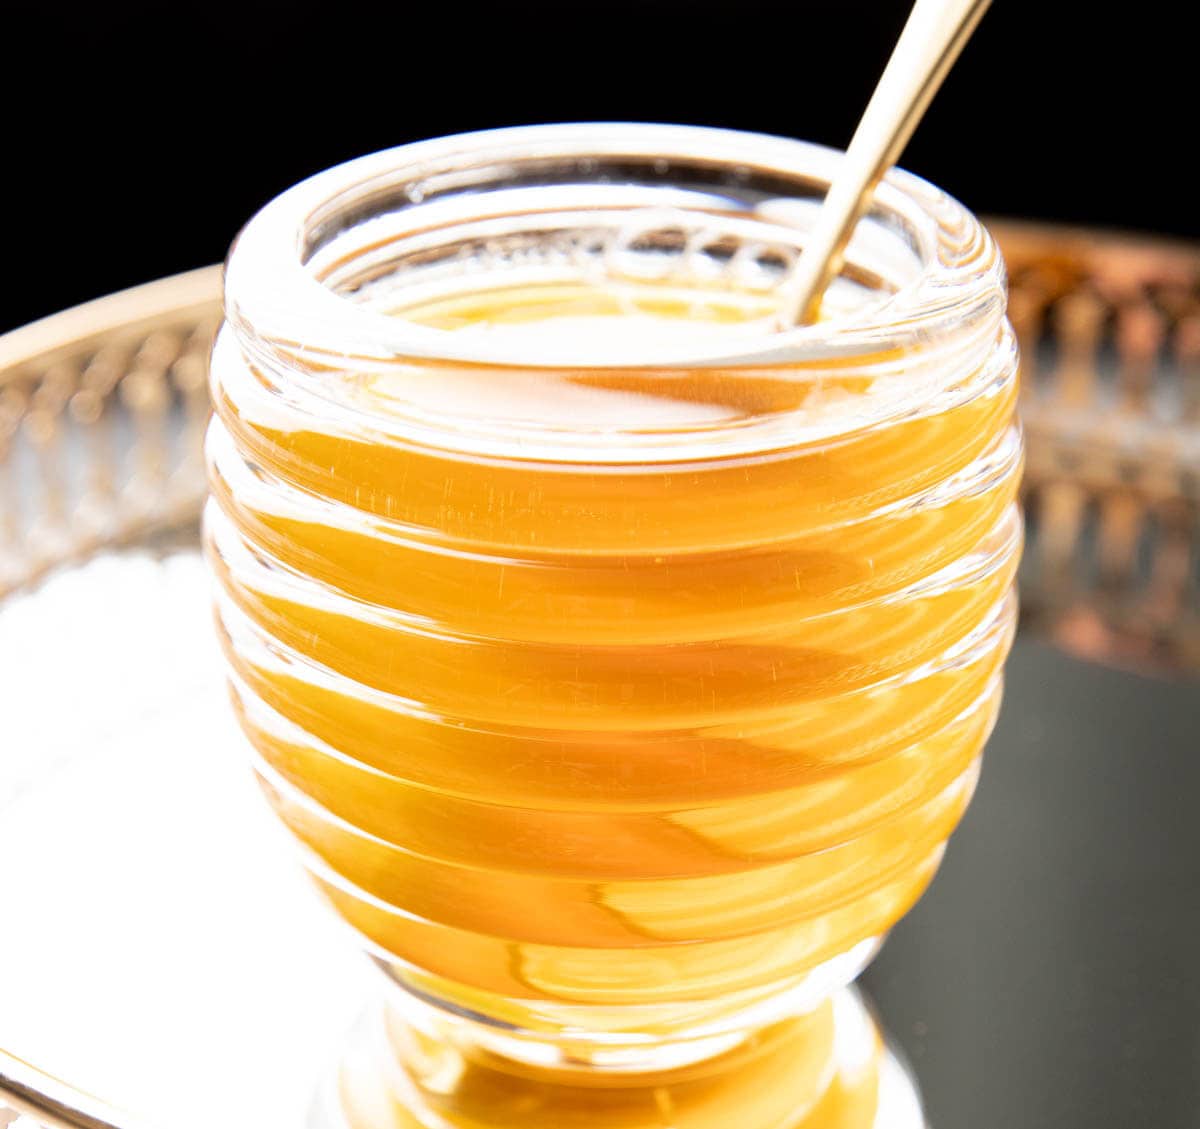 Jar of homemade honey syrup, a key ingredients in the bees knees cocktail